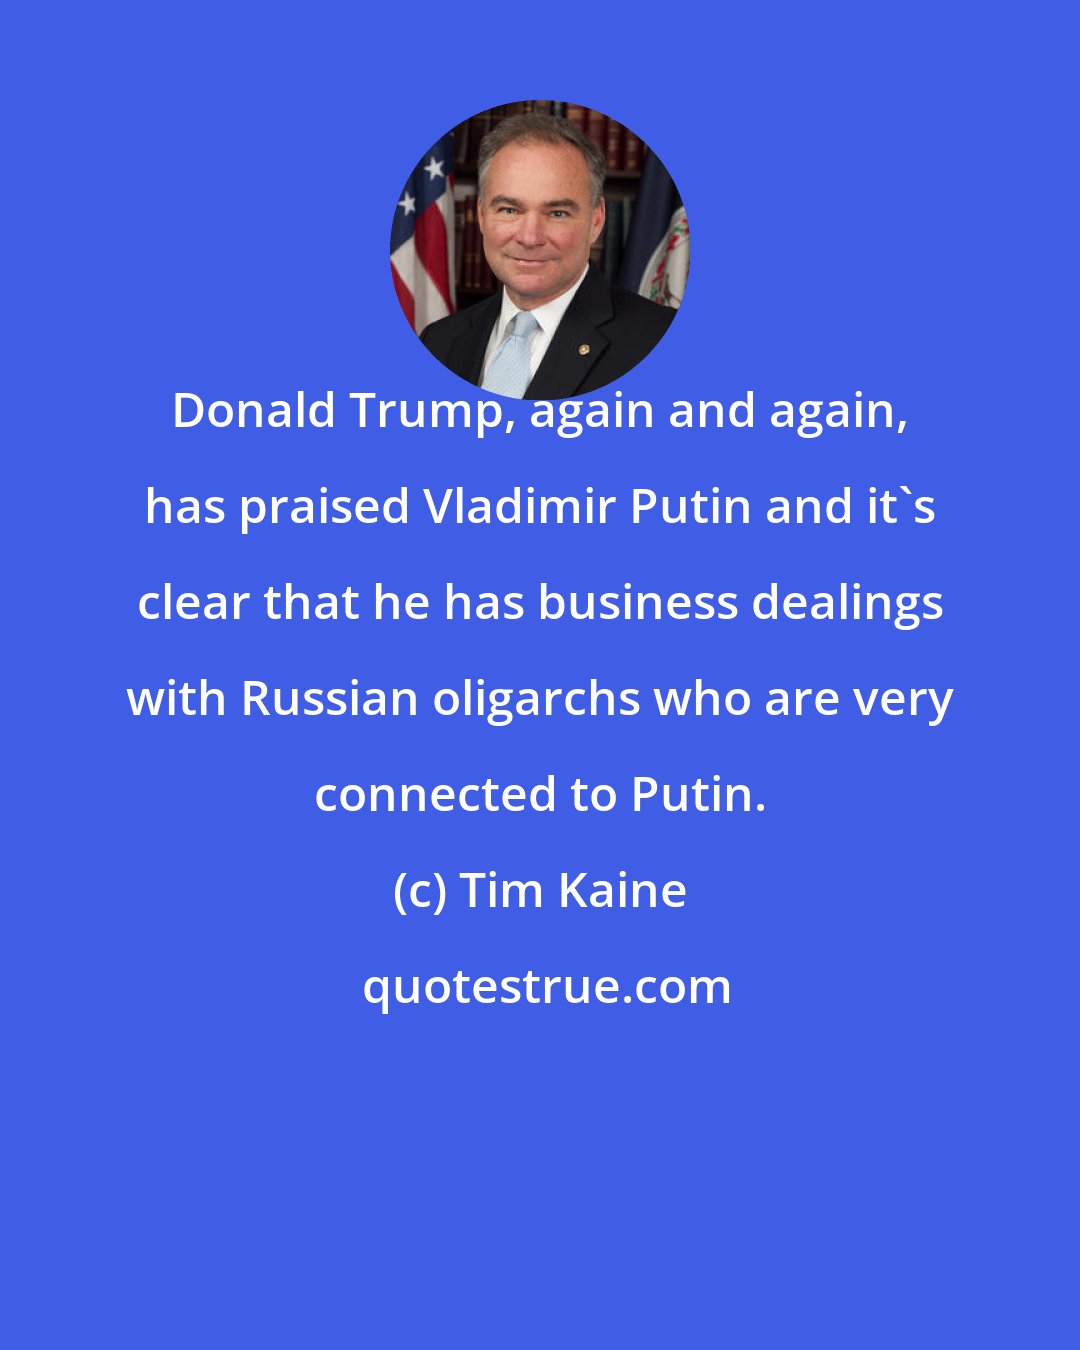 Tim Kaine: Donald Trump, again and again, has praised Vladimir Putin and it's clear that he has business dealings with Russian oligarchs who are very connected to Putin.